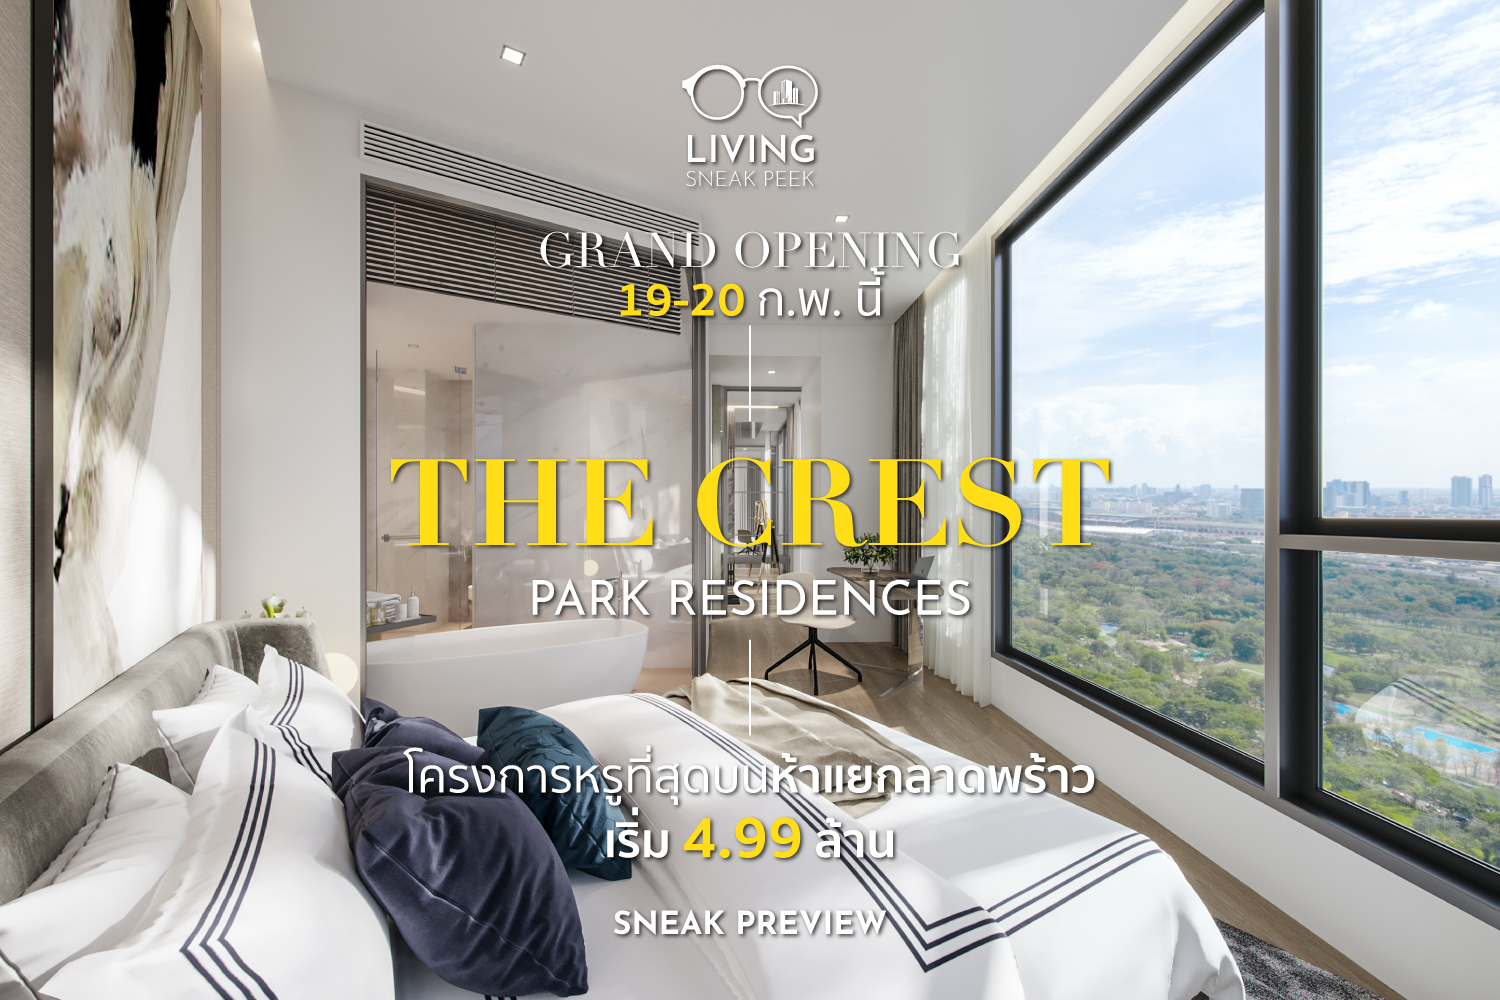 Grand Opening - The Crest Park Residences